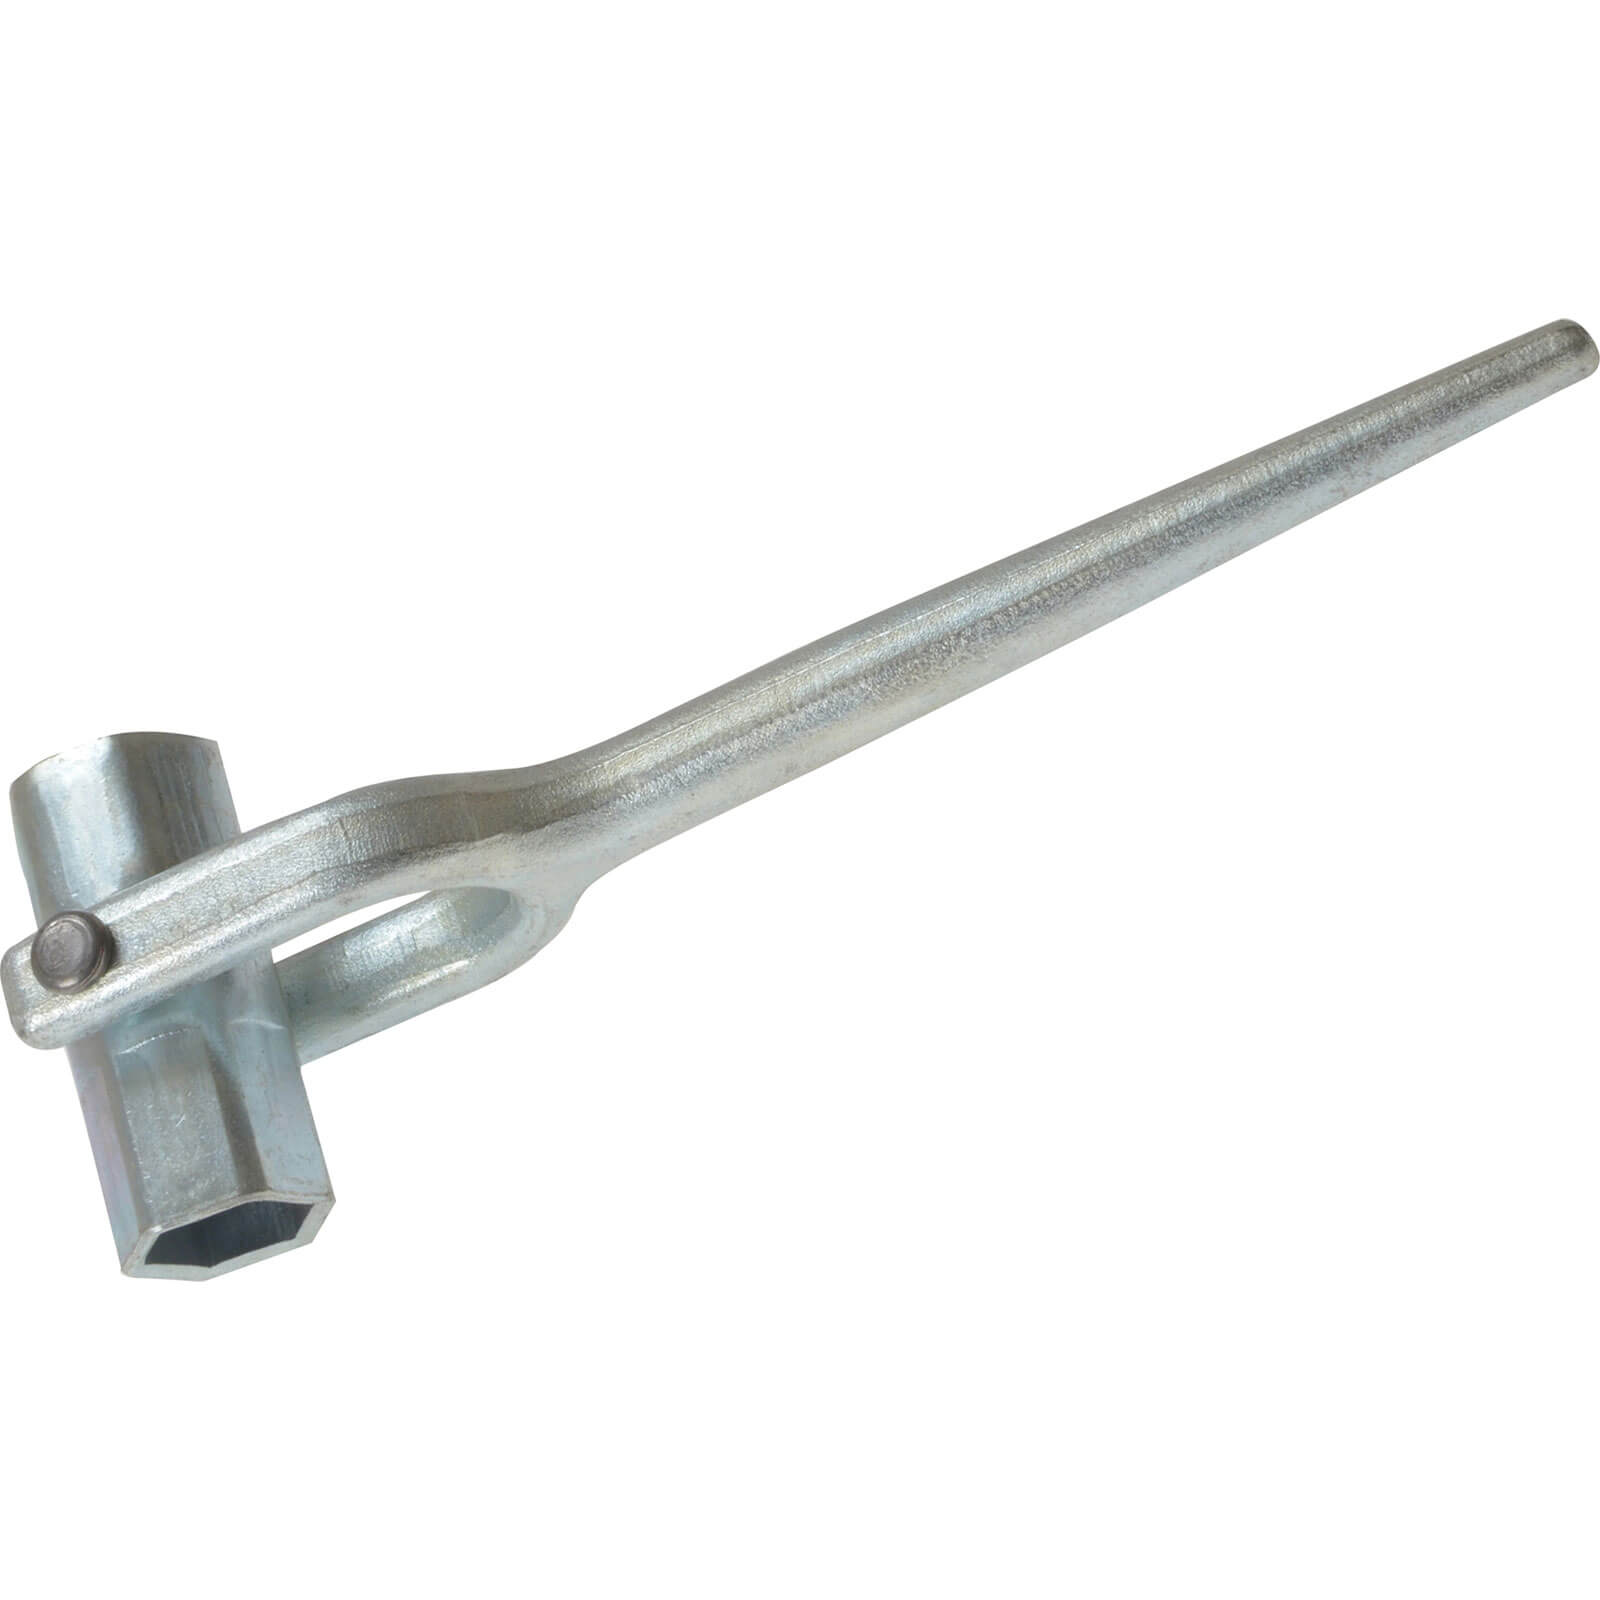 Priory 325 Double Ended Scaffold Spanner Whit 7/16" x 1/2" Round Steel Socket